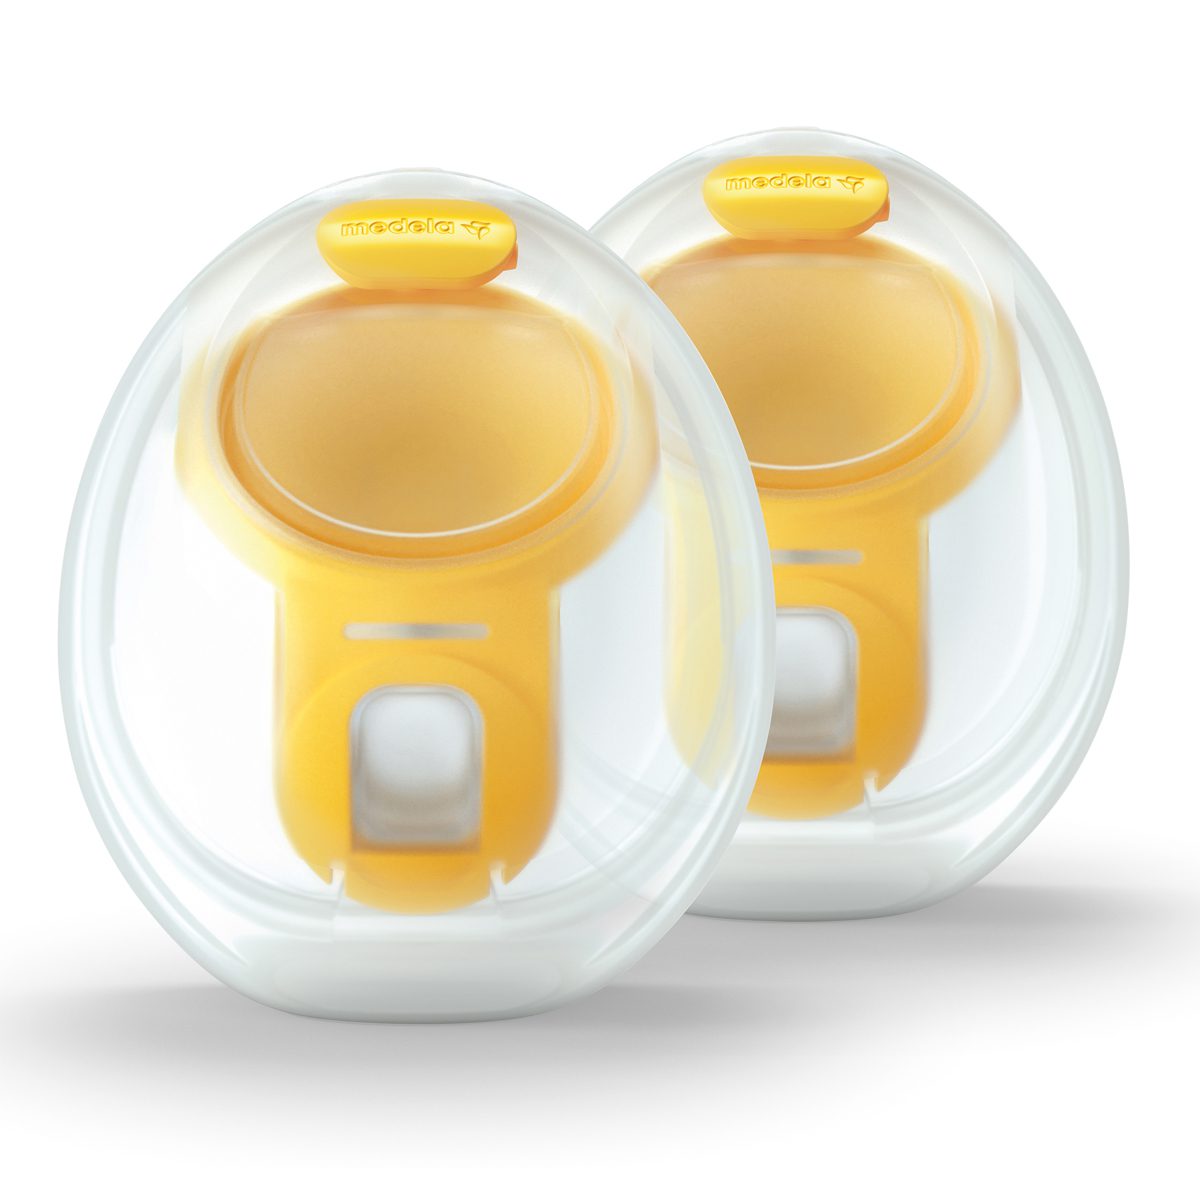 https://www.breastpumps.com/wp-content/uploads/101045671-hands-free-collection-cups-main.jpg